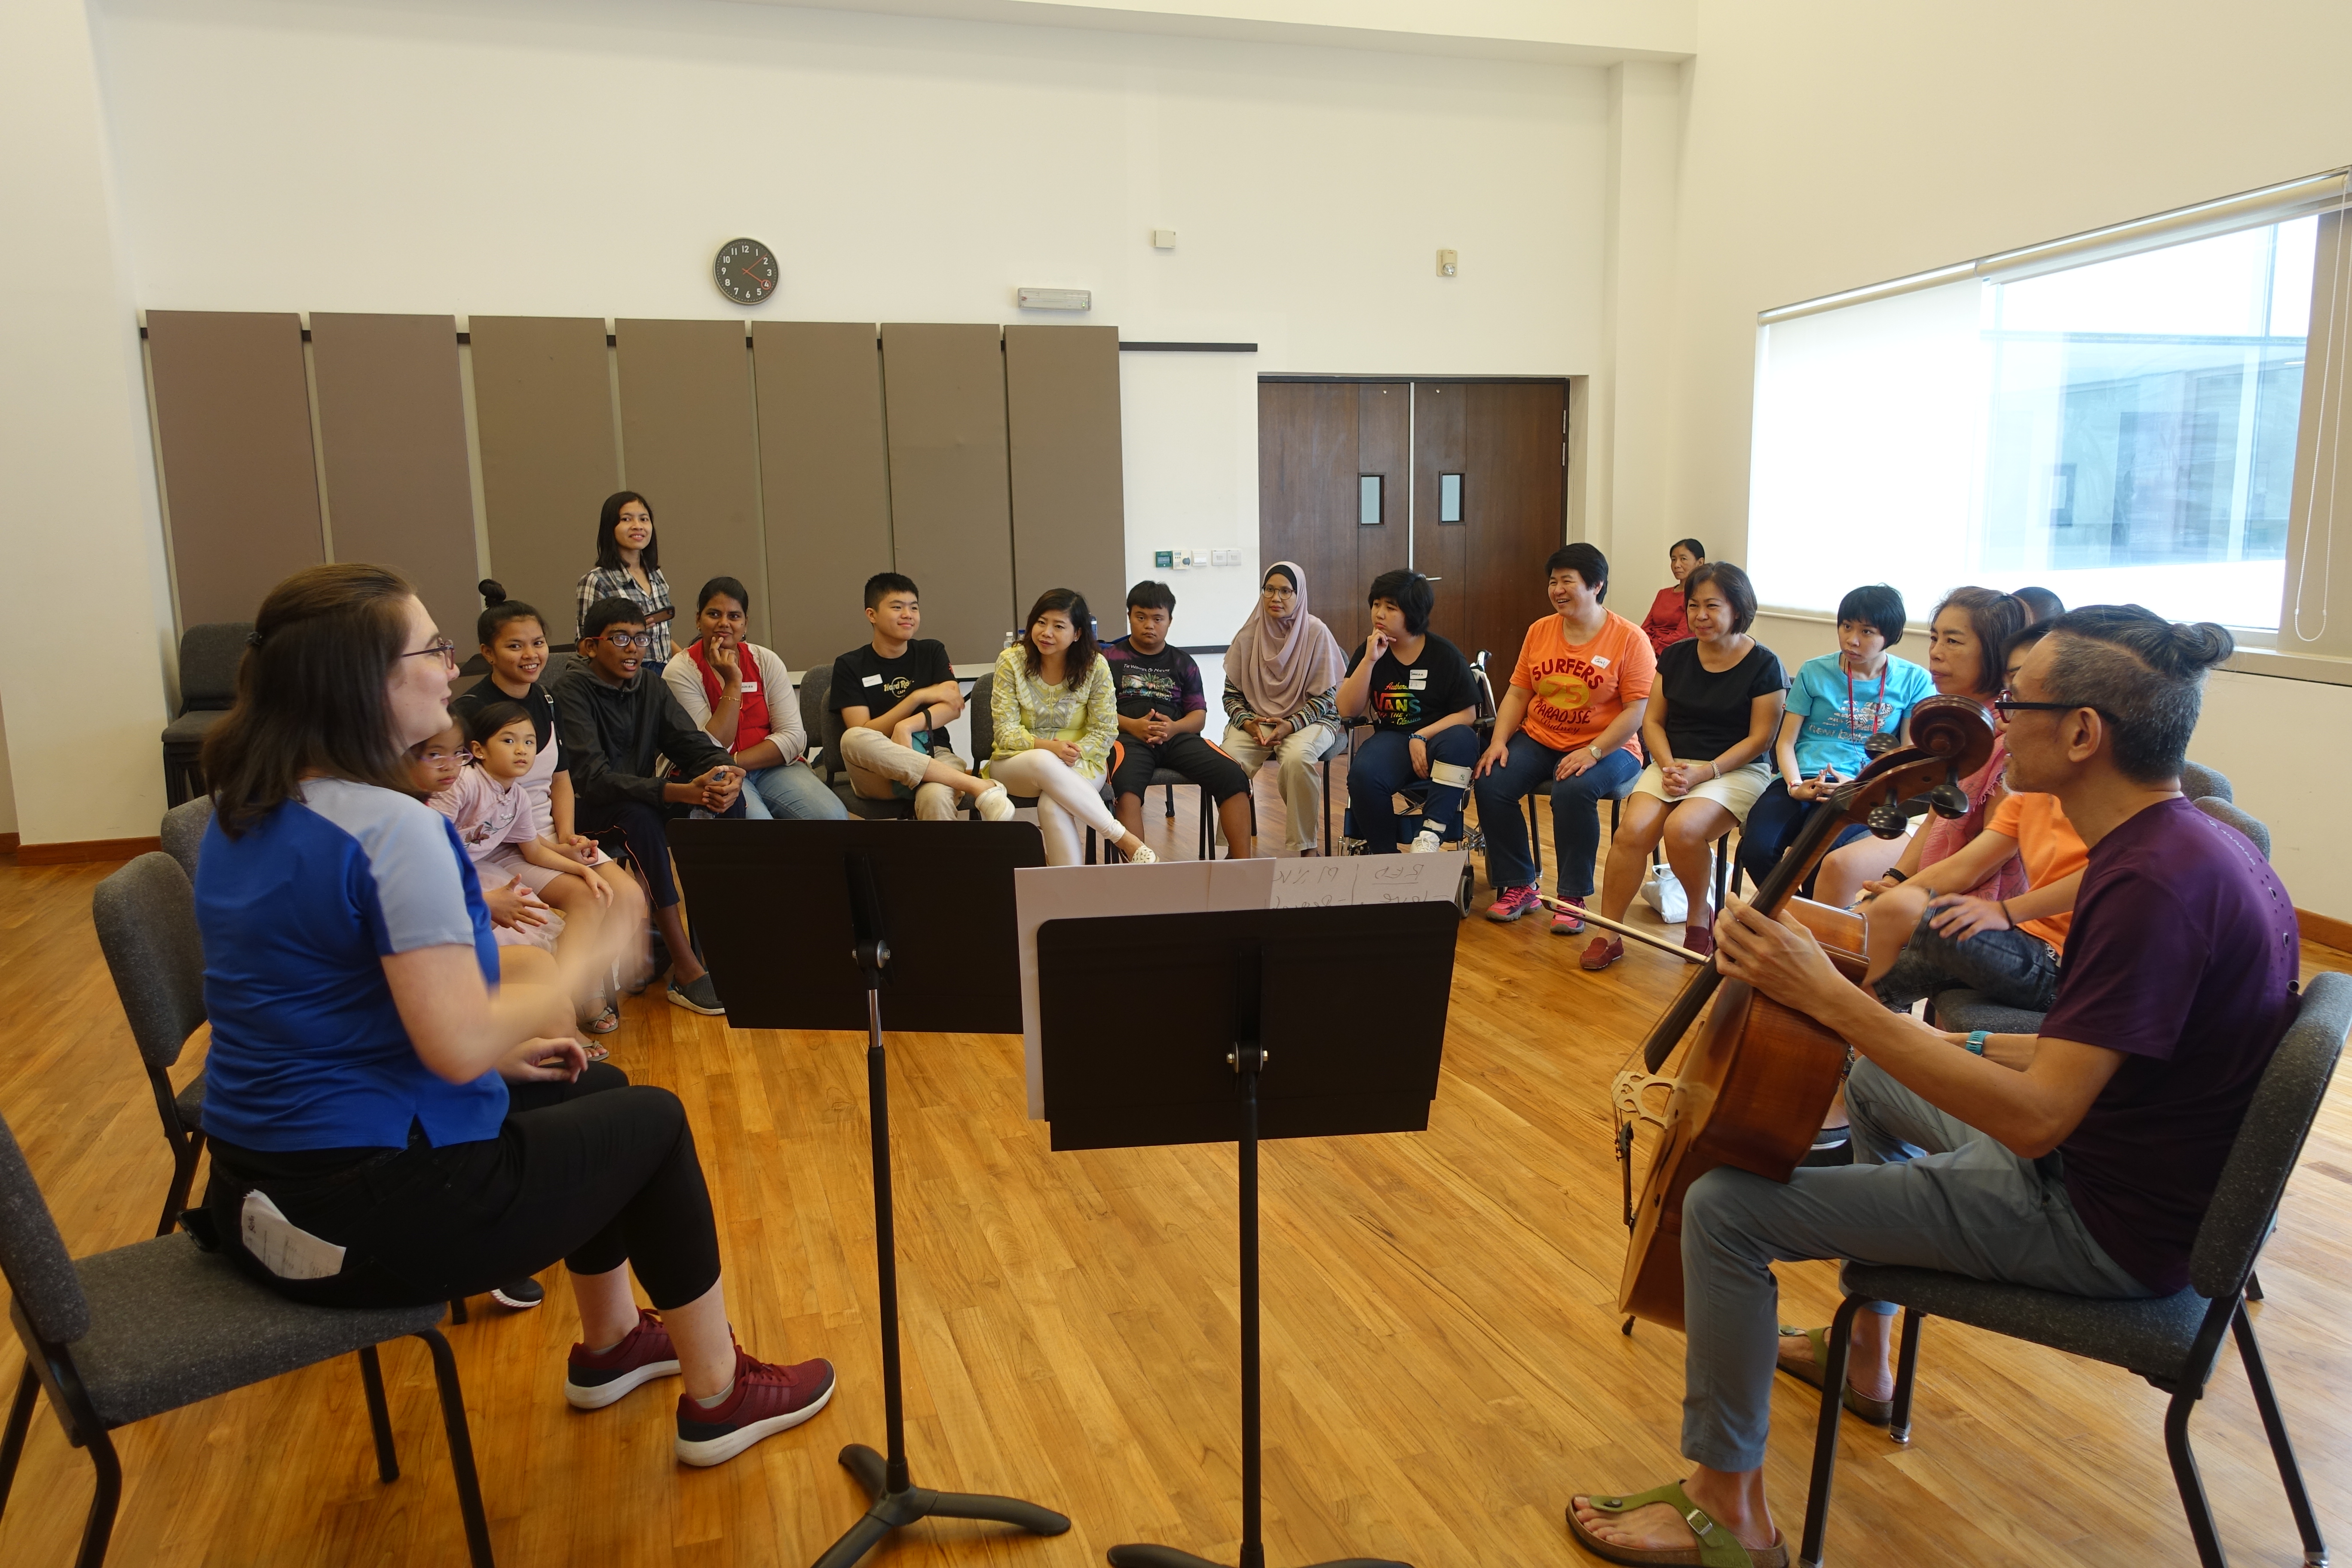 Project Artitude founder Leslie Tan (with cello) and YST Conservatory of Music alumnus Bethany Nette (extreme left) imparting musical skills to SSV during one of the workshops.